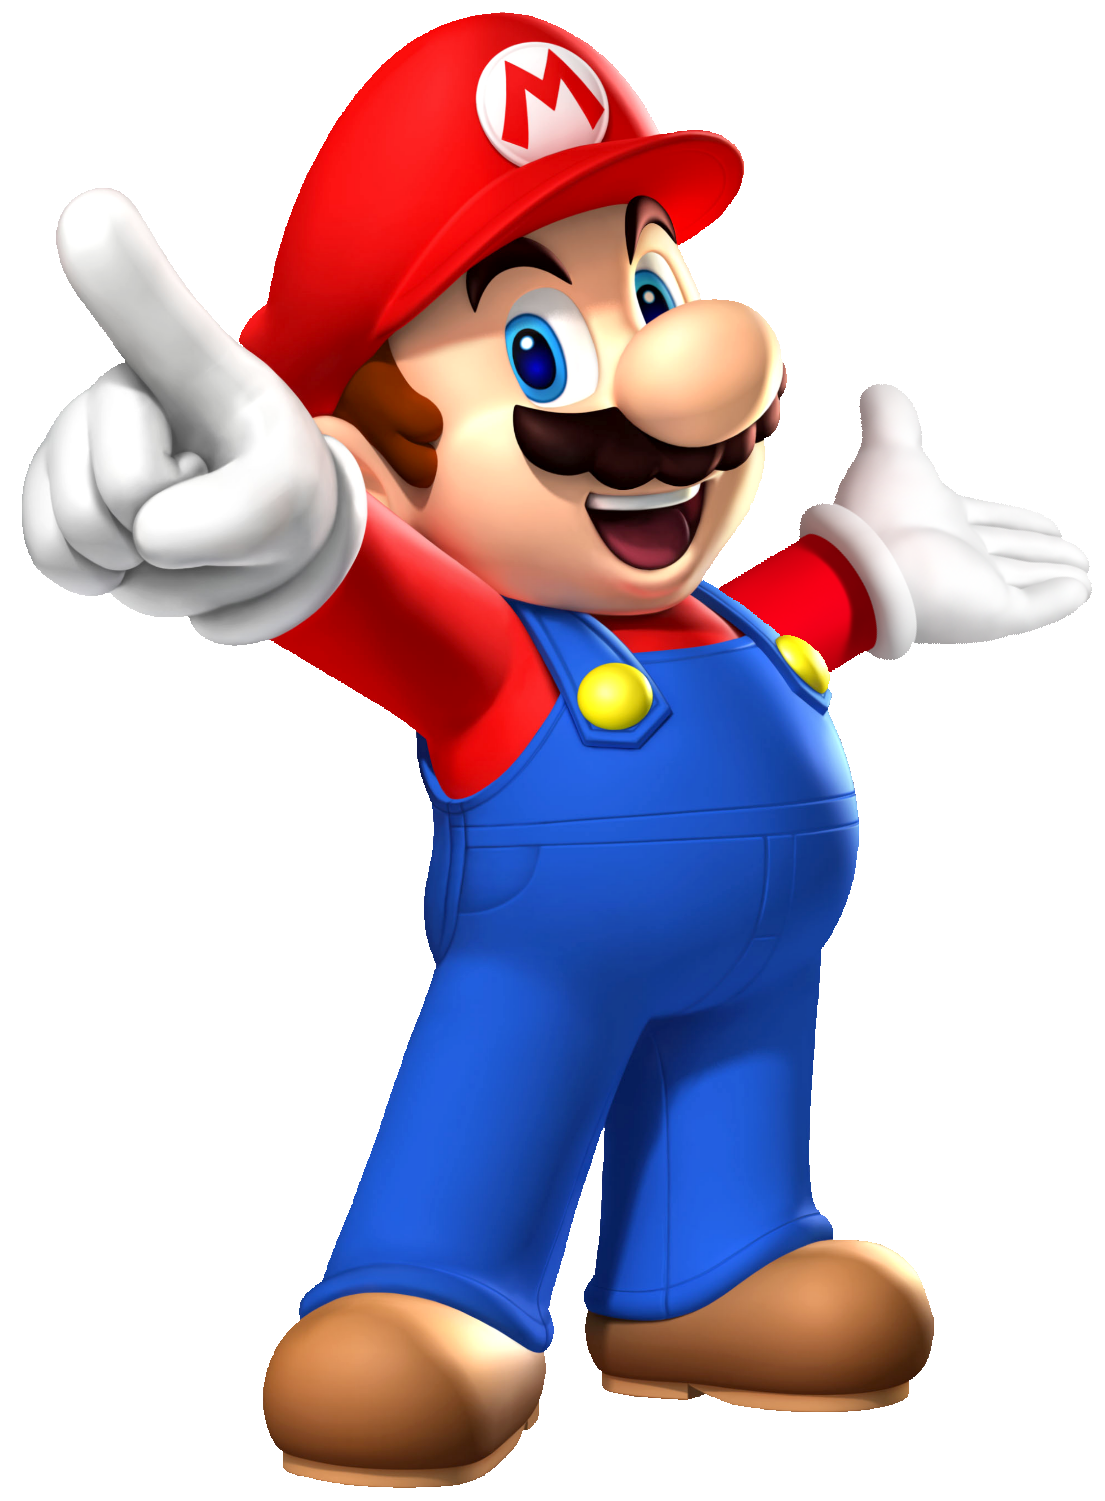 Mario PNG images free download, Super Mario PNG.